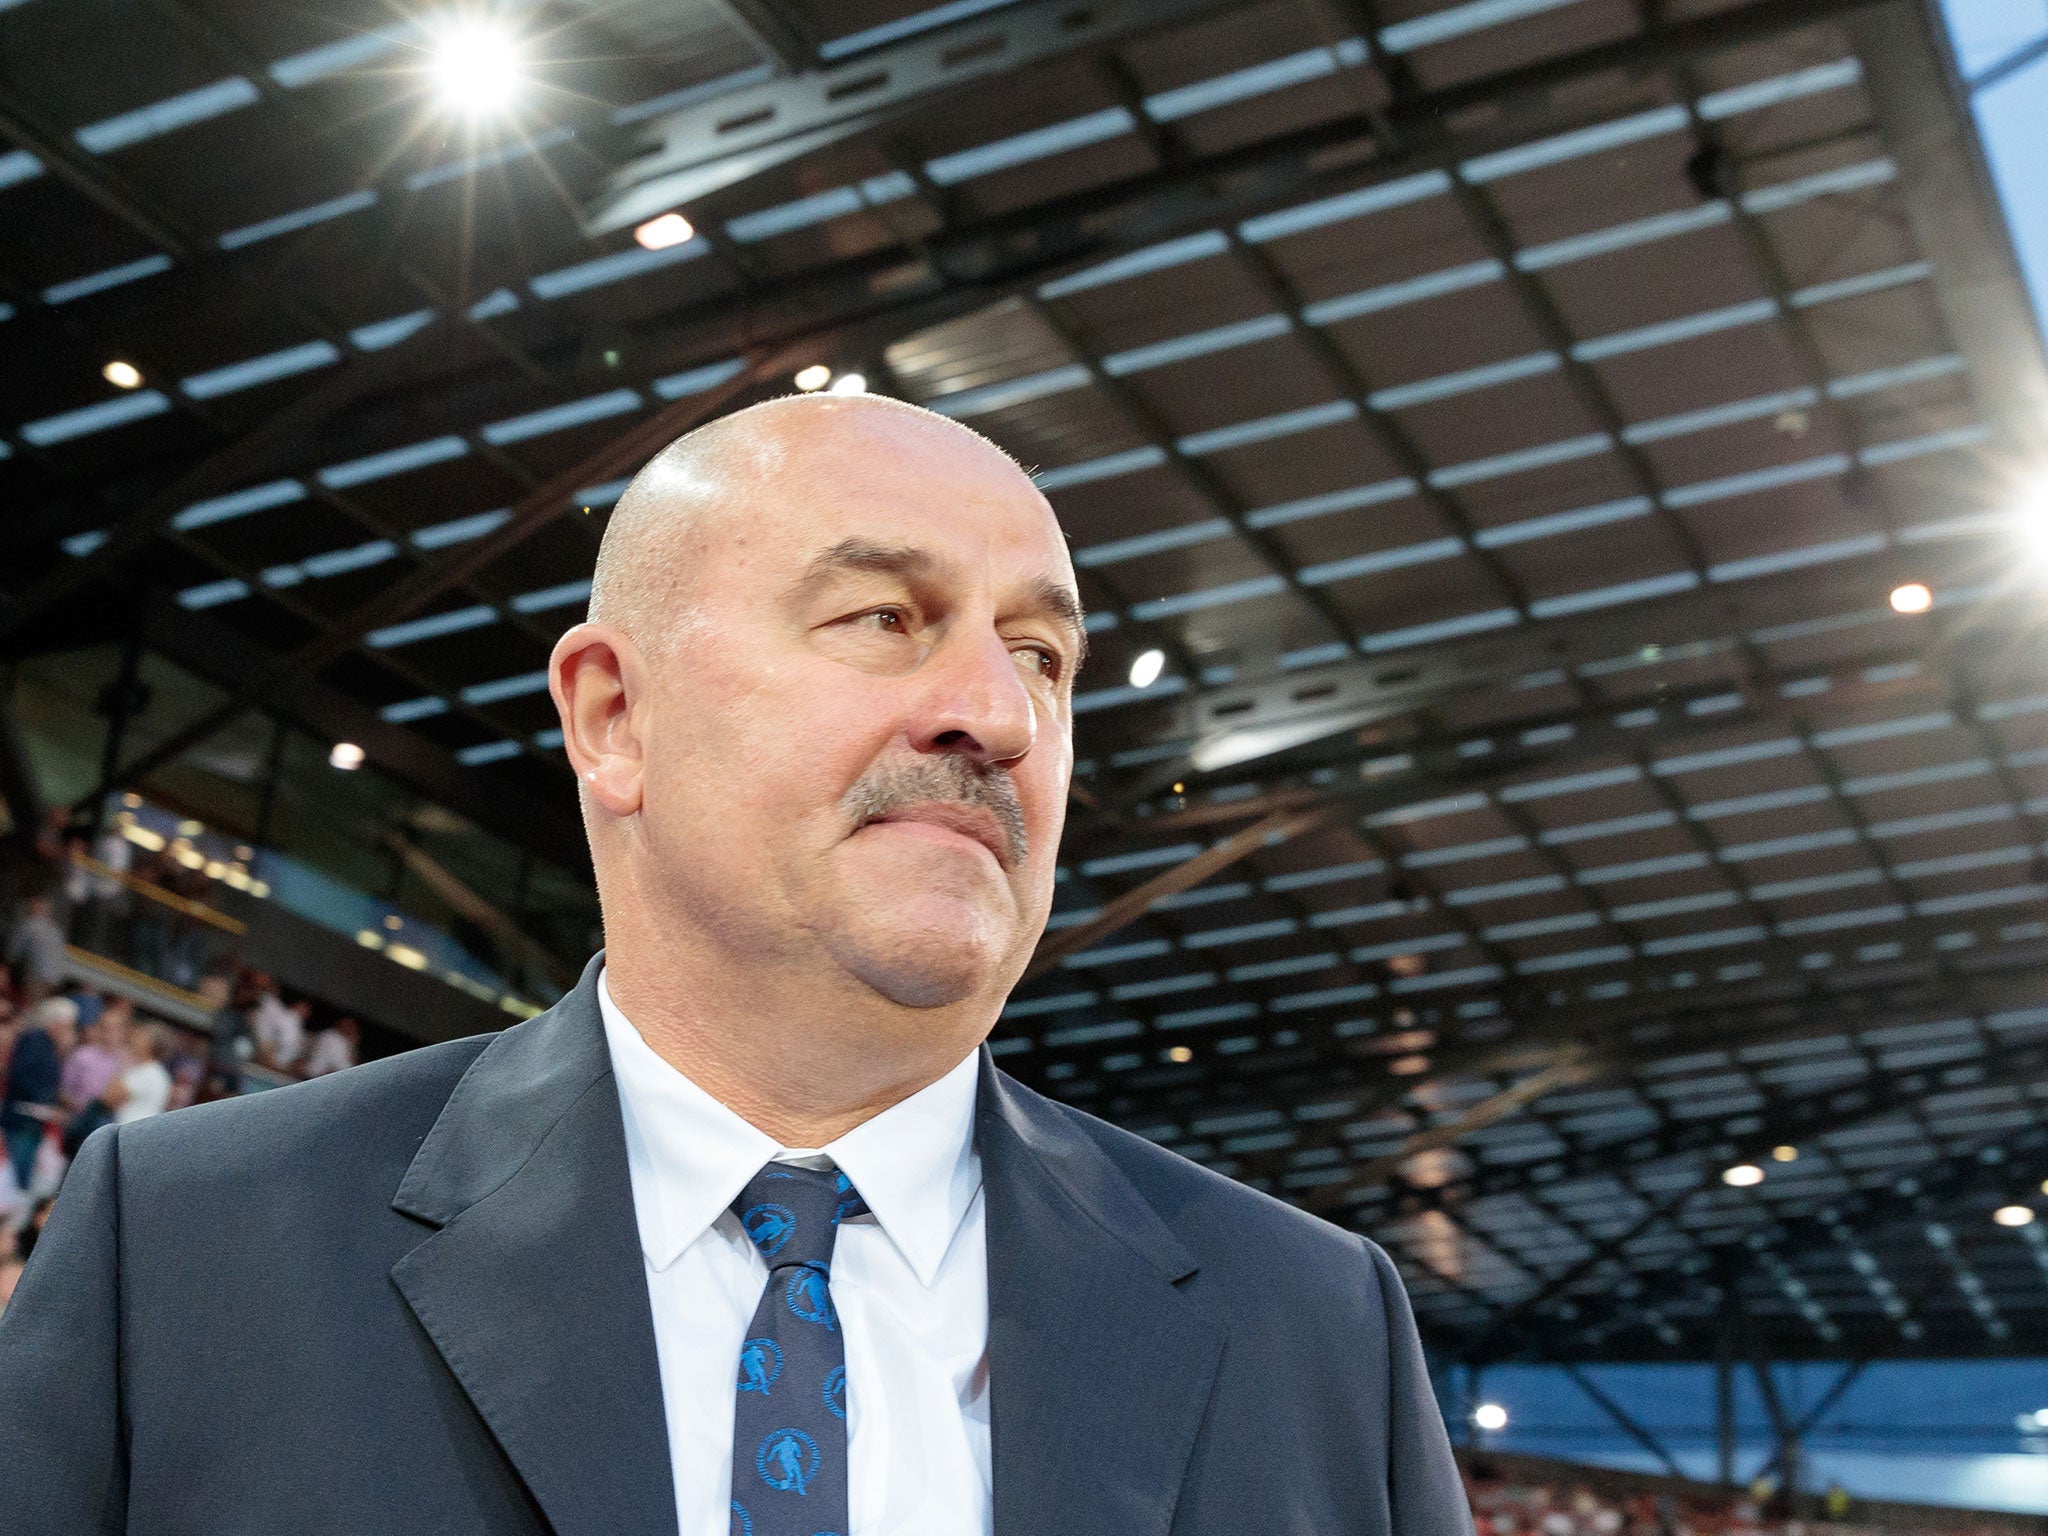 Stanislav Cherchesov is the man charged with guiding Russia at this summer’s World Cup